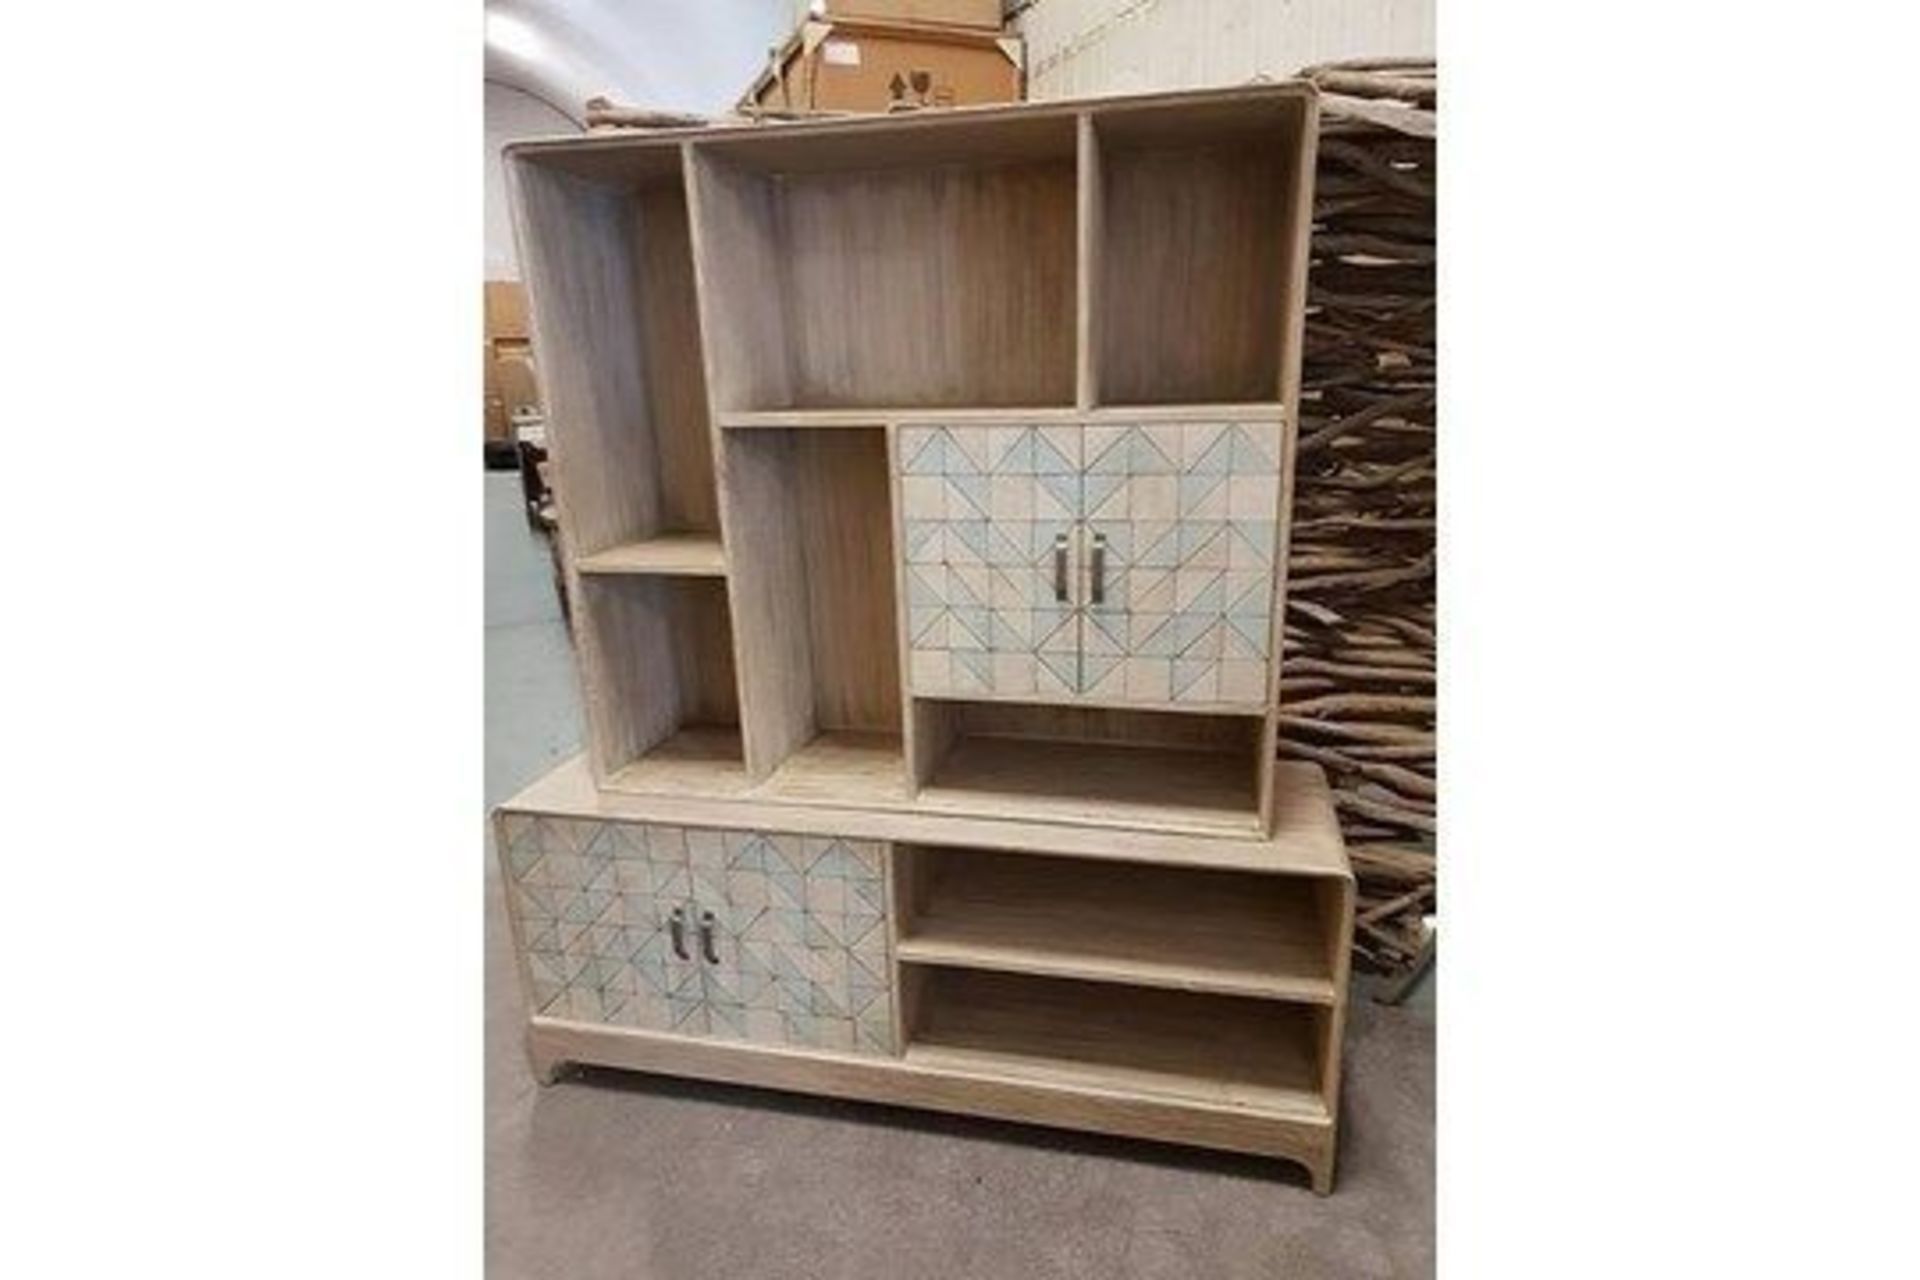 Tracy Boyd Mosaic Contemporary Wall Storage System Wall Mounted Cabinet With Shelving Low Media Unit